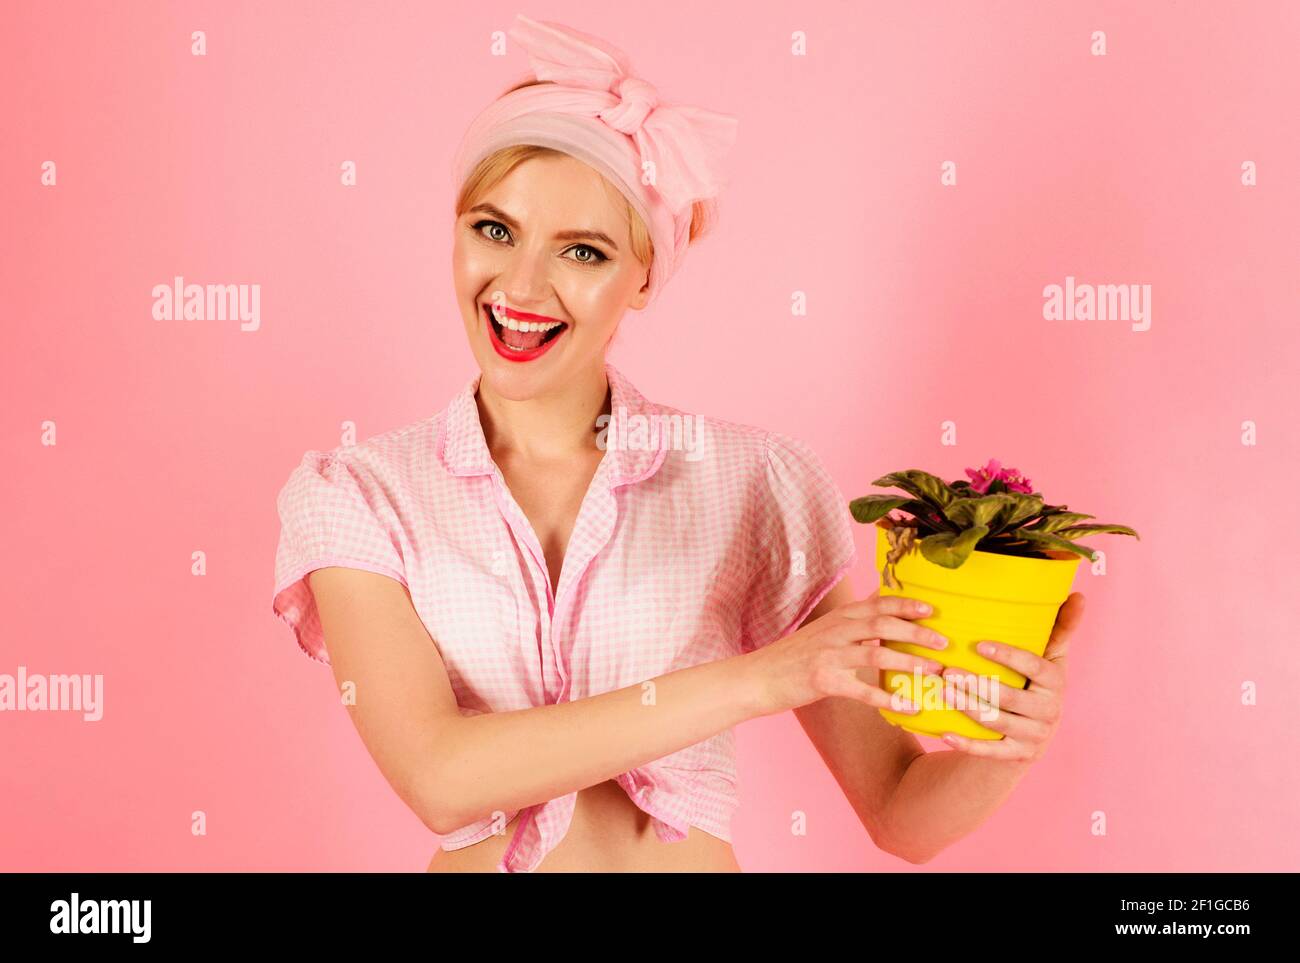 Smiling woman with violet flower in pot. Girl cultivating flowers. Planting. Stock Photo